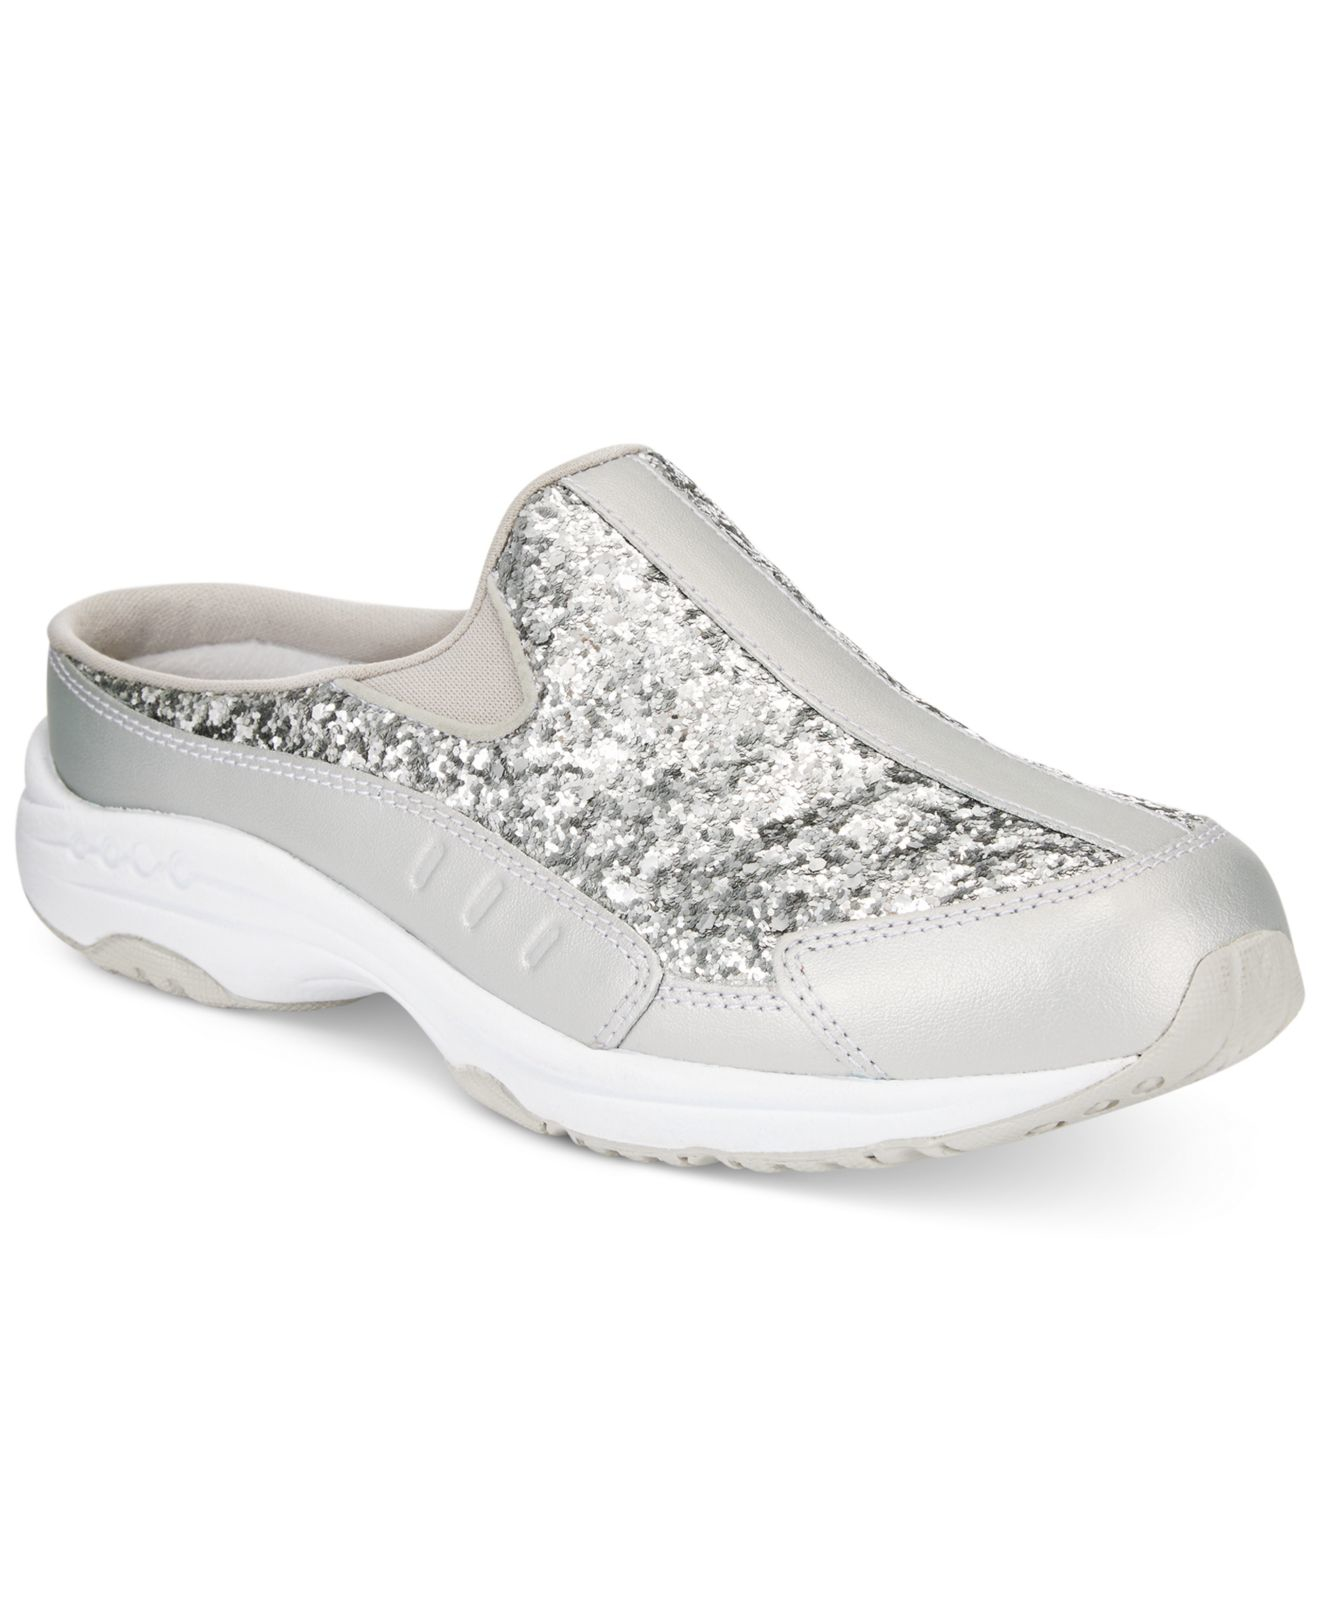 silver sneakers travel